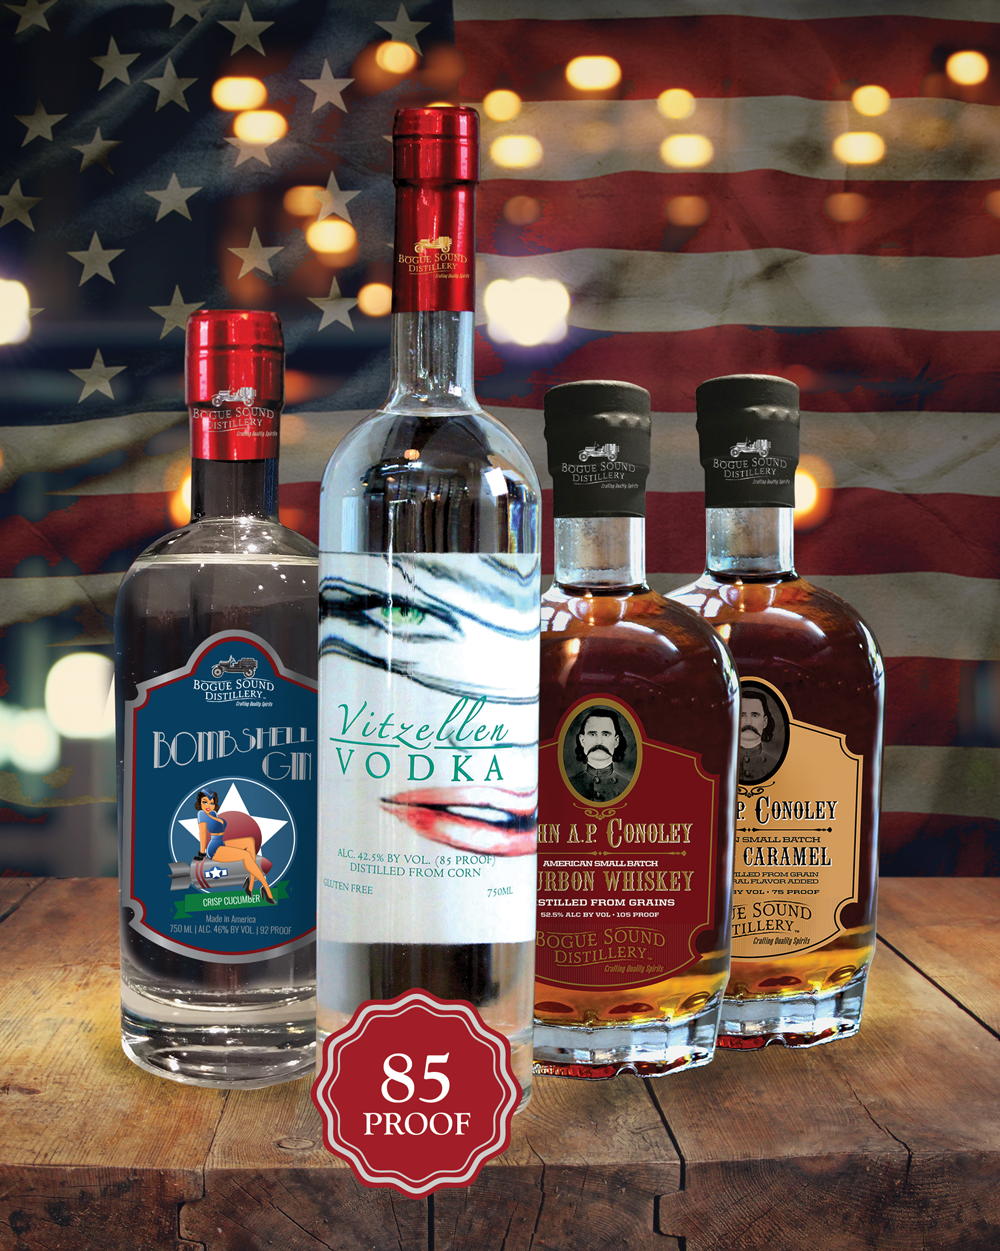 Choosing the Right Glass for your Liquor - Bogue Sound Distillery